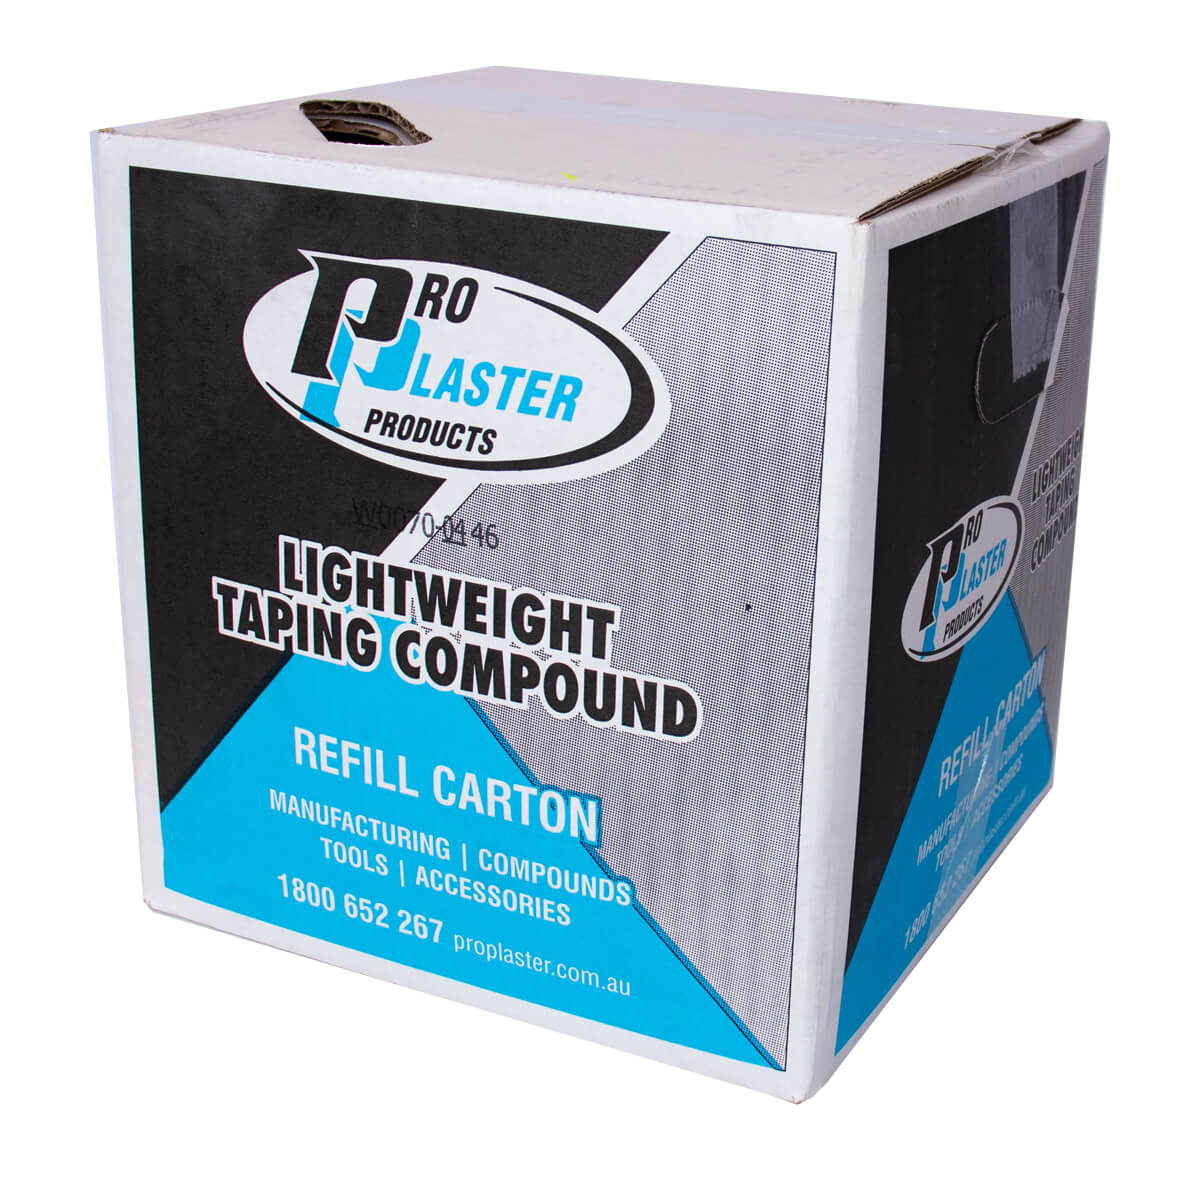 Taping Compound LW Carton 13.8Ltr (16.5 kg) White